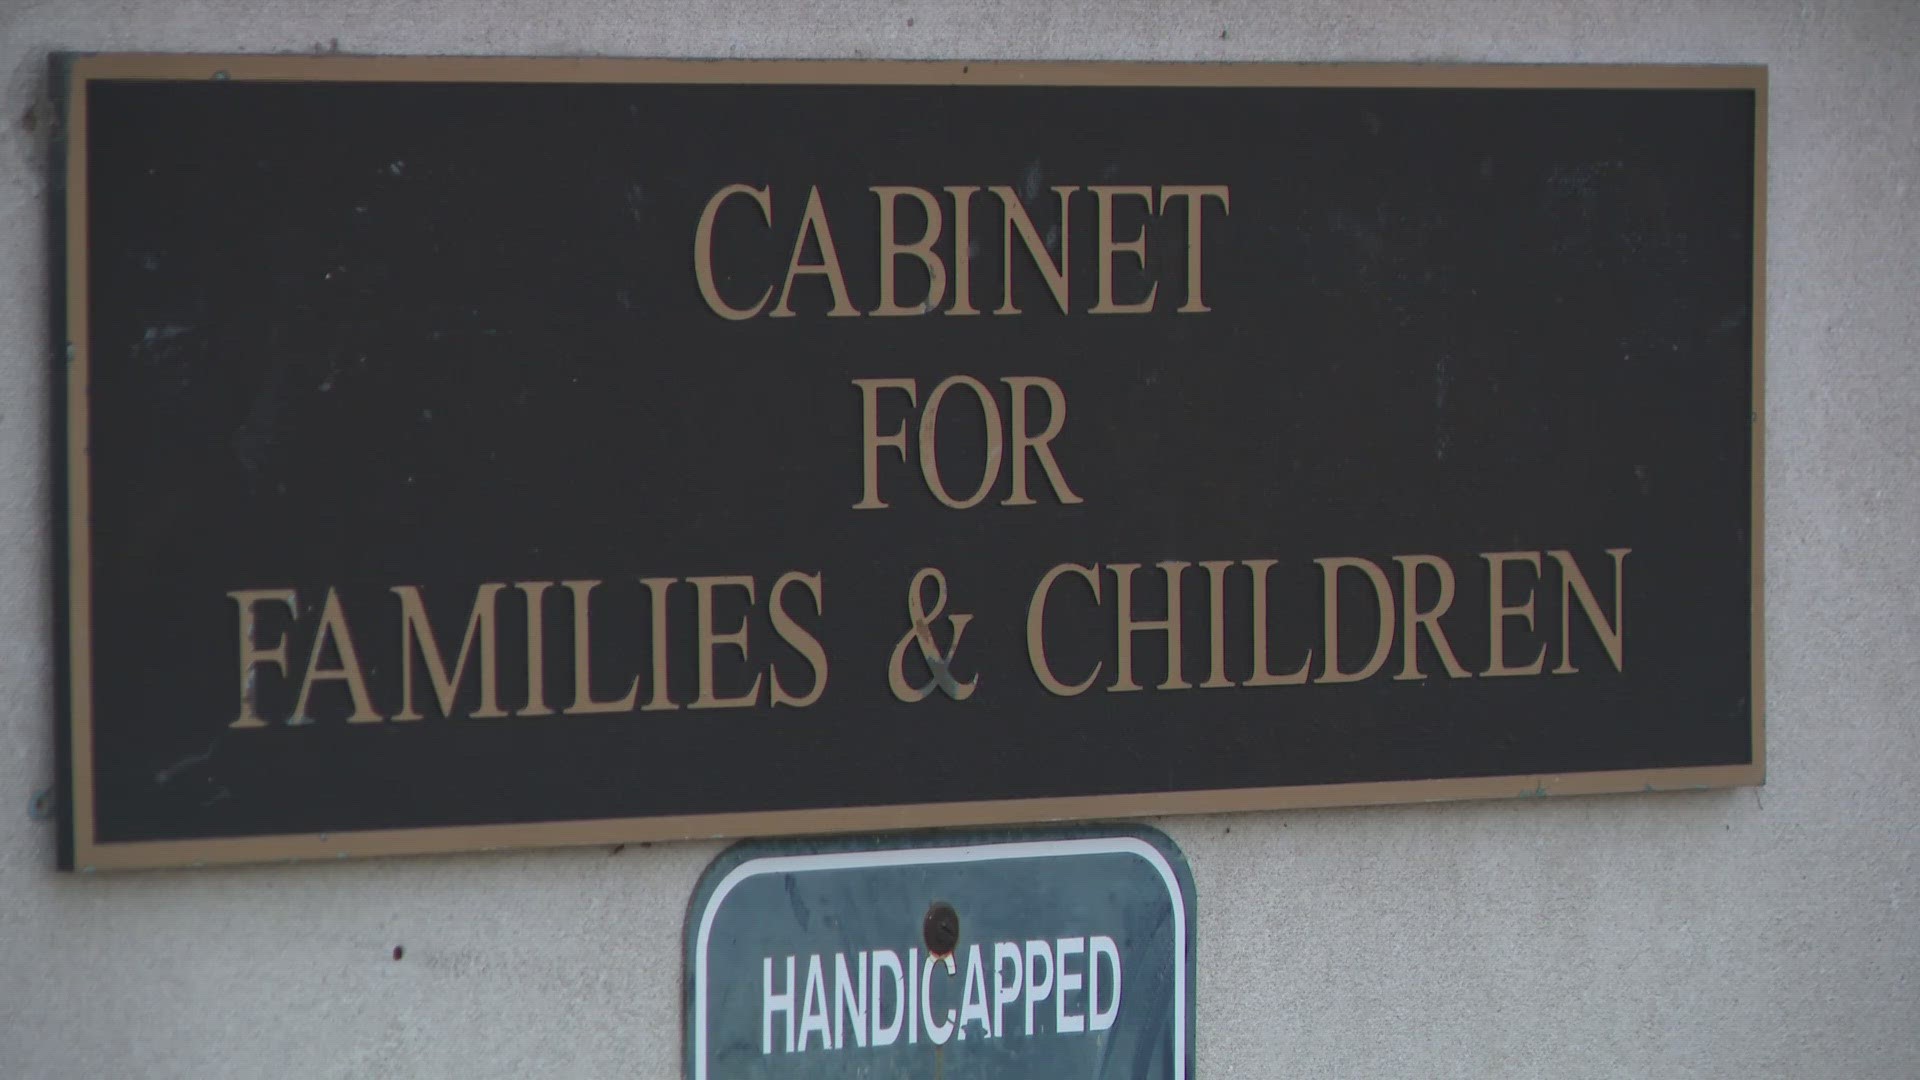 A cabinet spokesperson told WHAS11 the stays usually last between one to three nights, and the children are provided with supplies needed for sleeping.